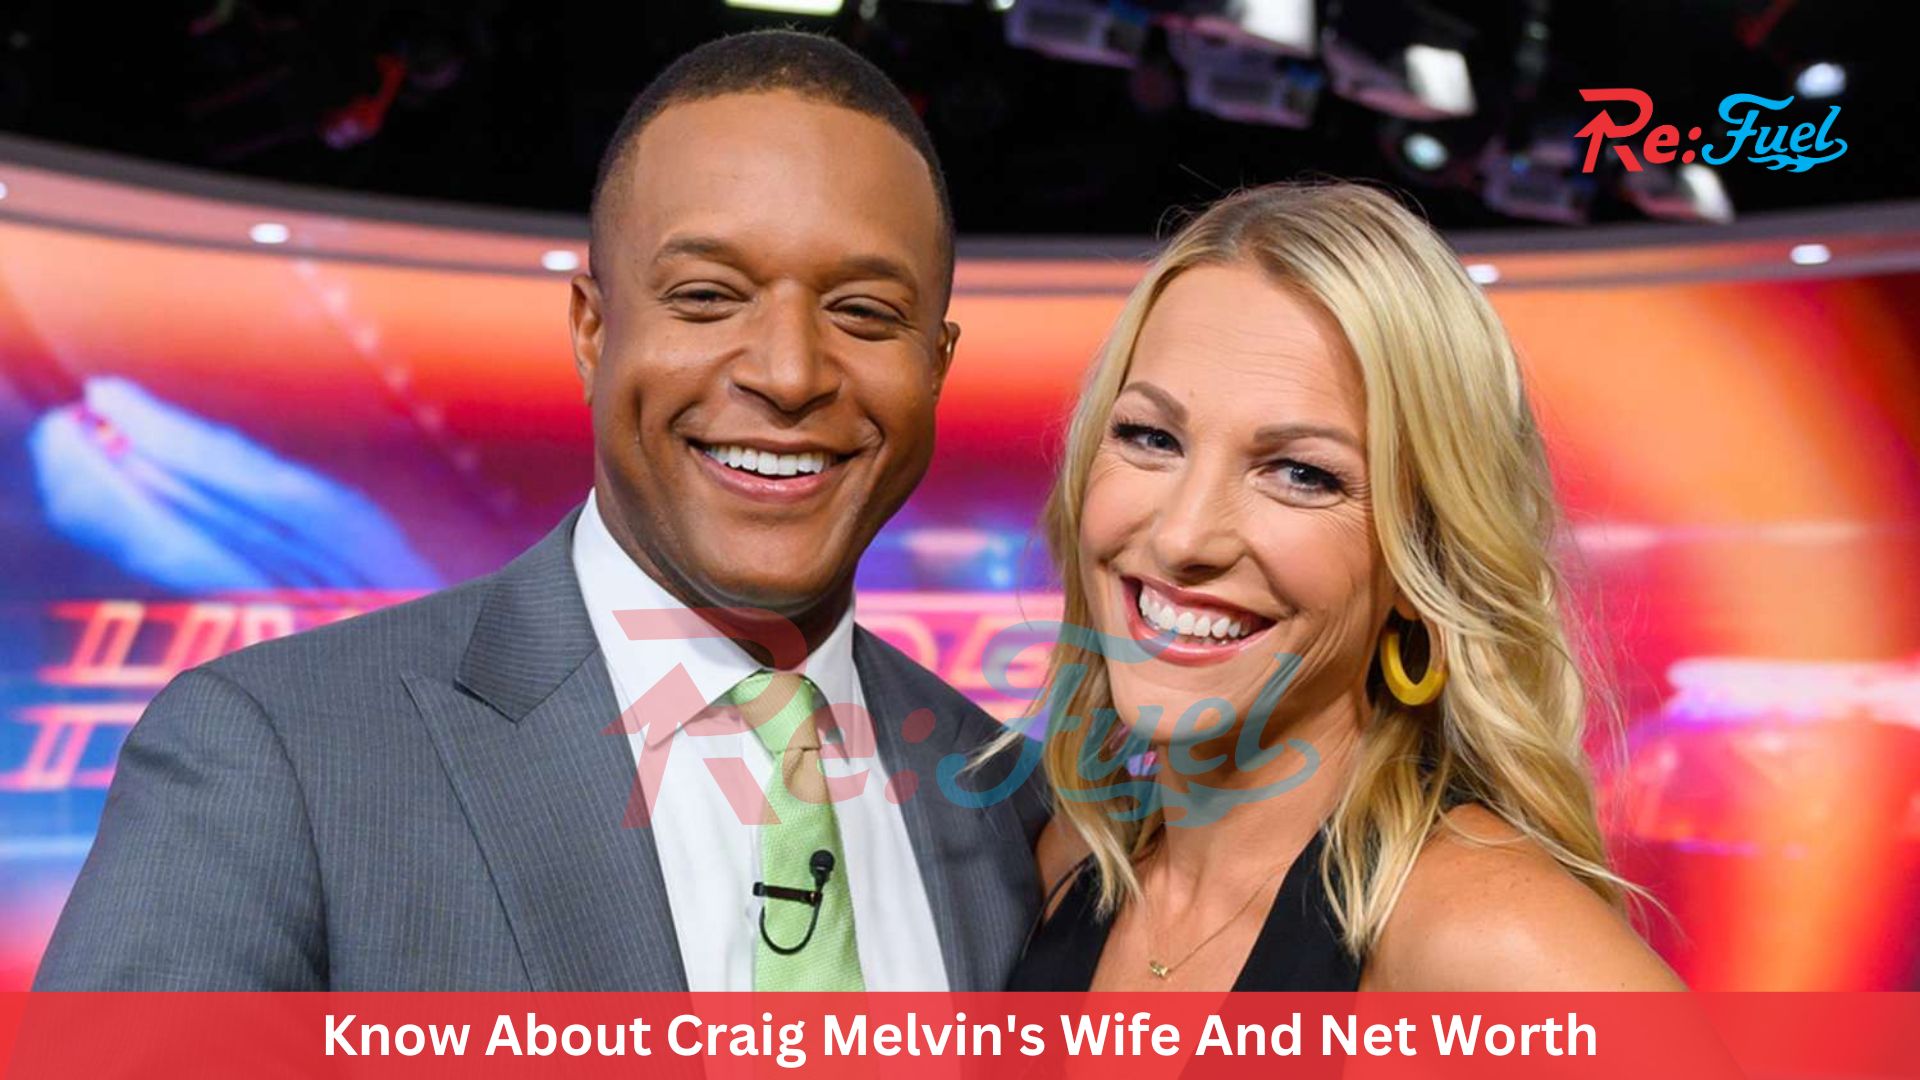 Know About Craig Melvin's Wife And Net Worth